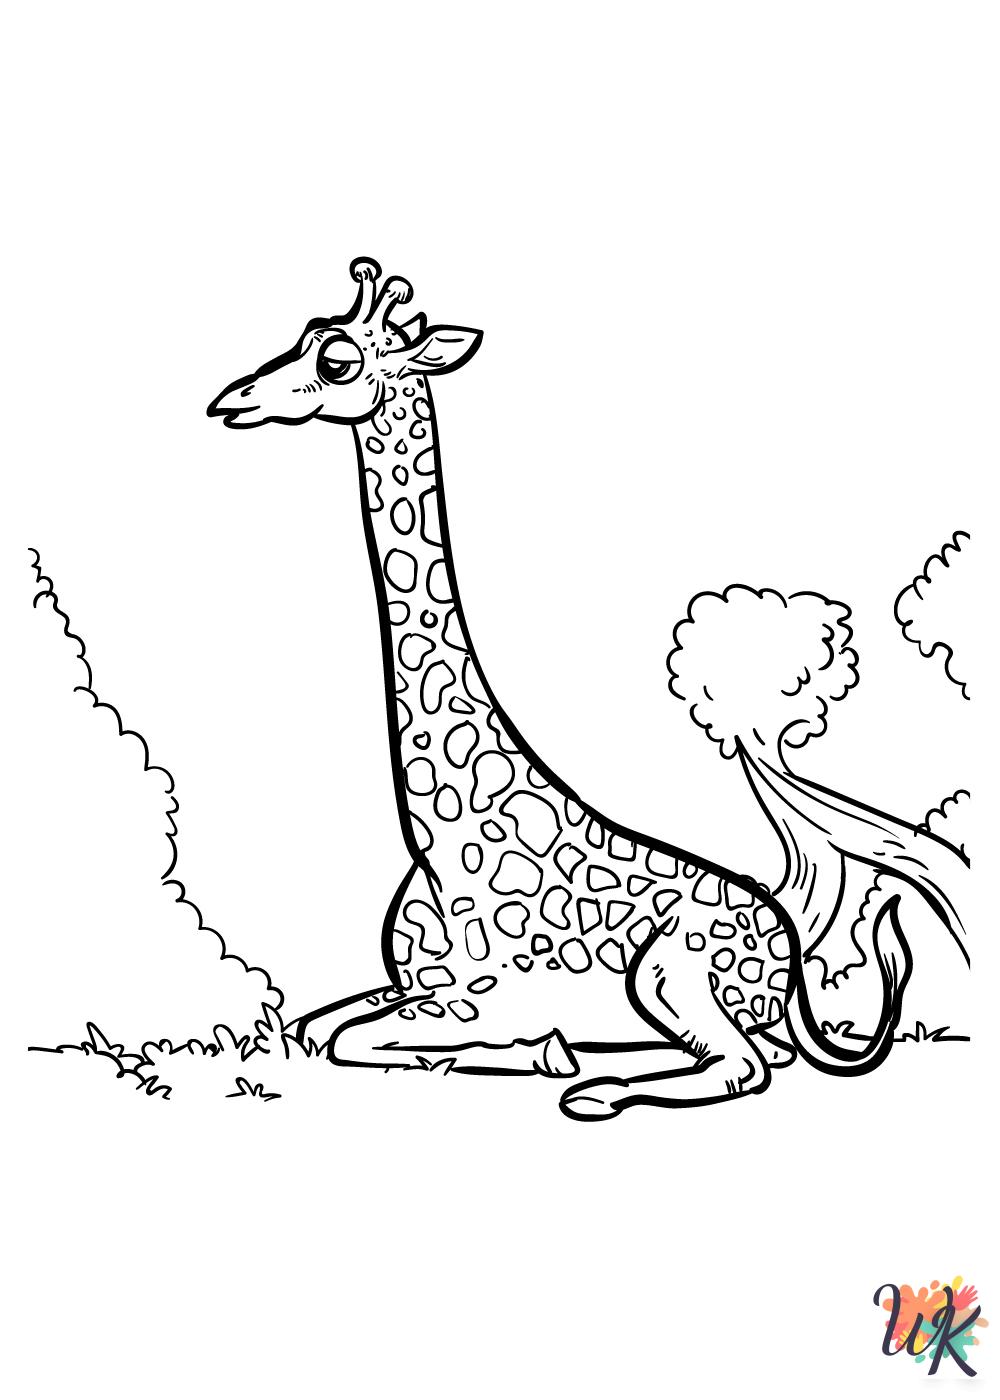 Giraffe coloring pages printable free